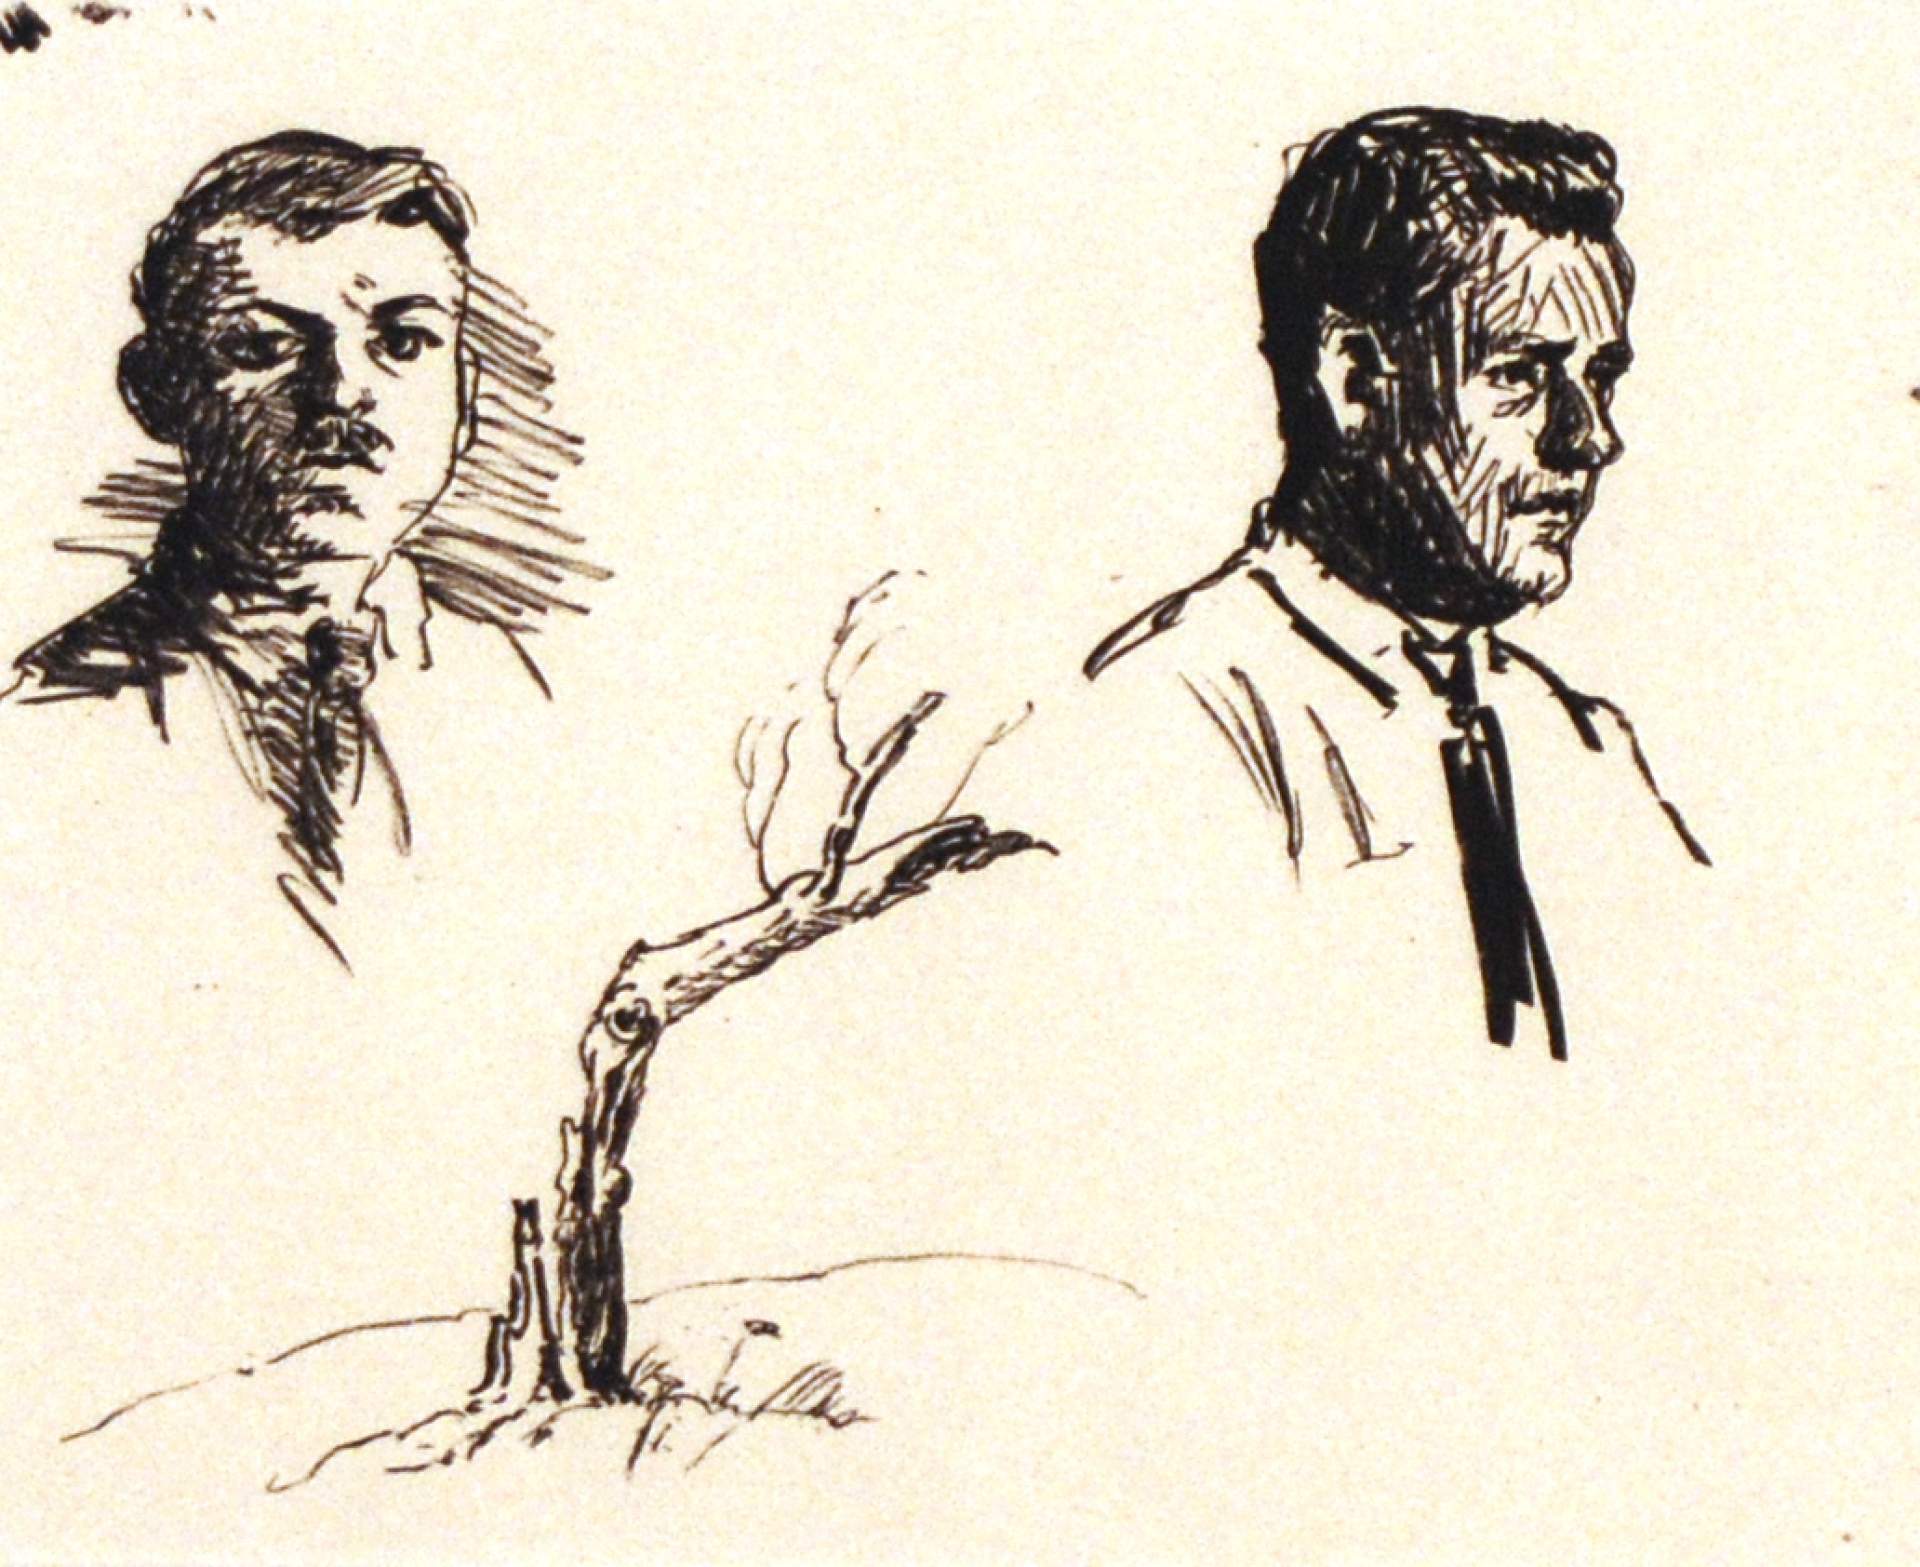 Untitled artist portraits, lithography lesson created with Bolton C. Brown in Woodstock, NY